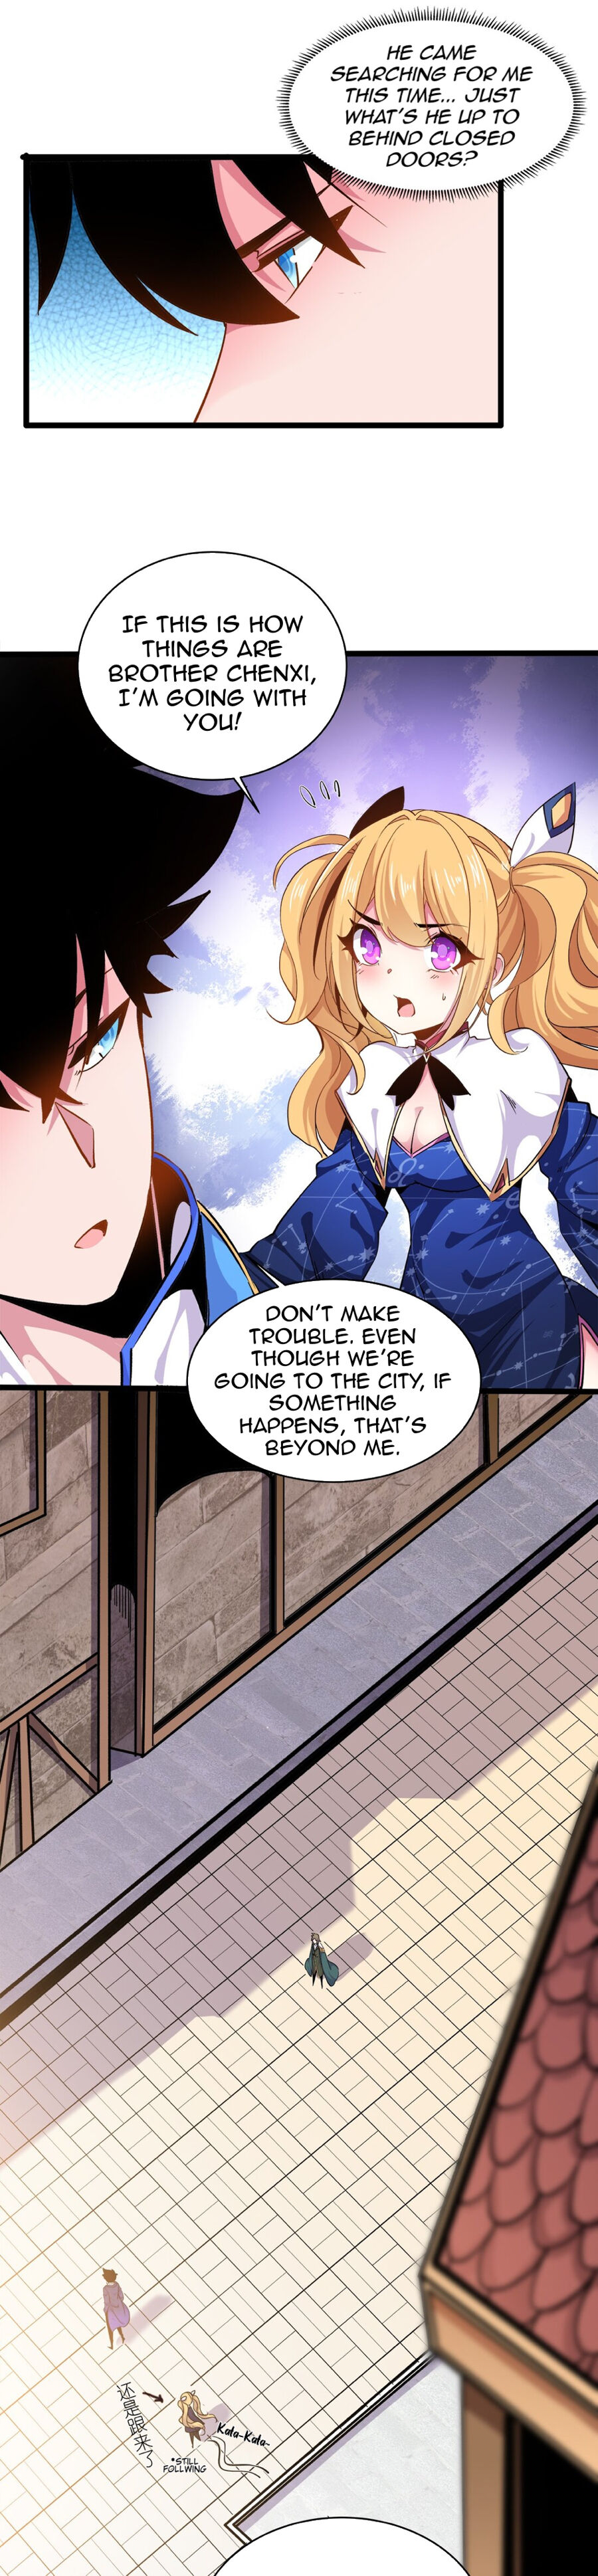 Princess, Please Distance Yourself A Little Chapter 11 - Page 9